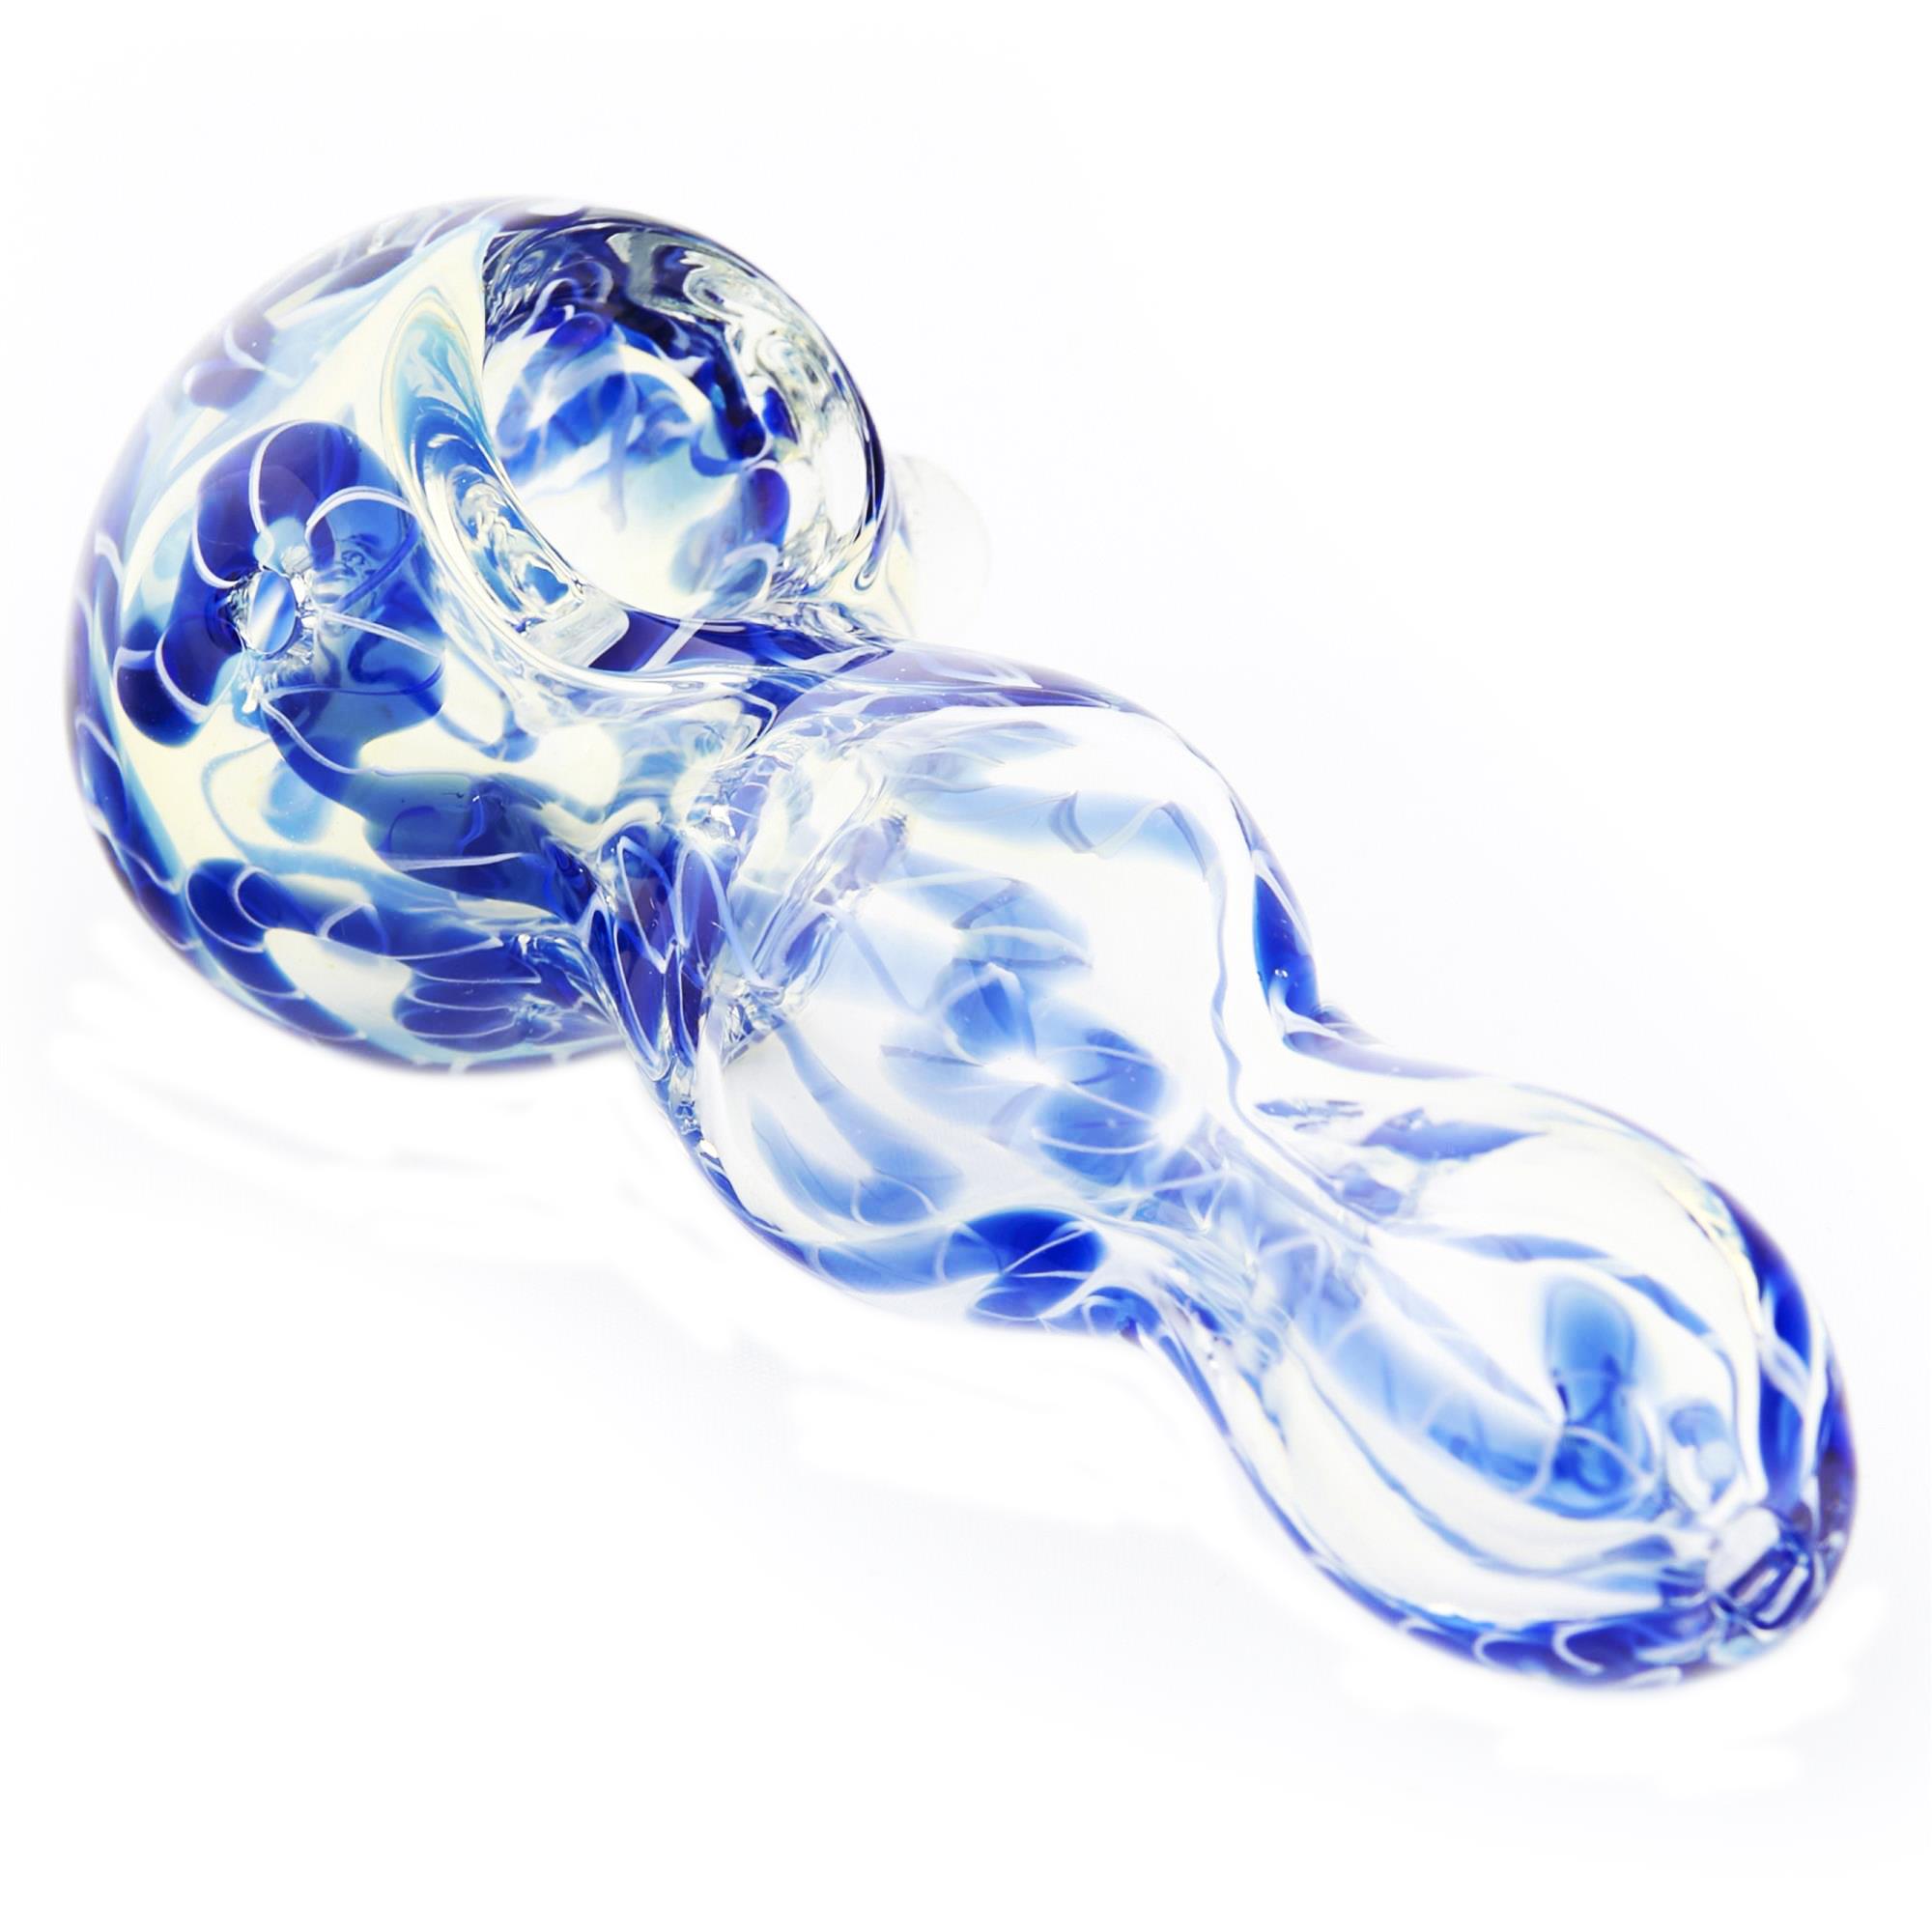 COOL SPOON PIPE